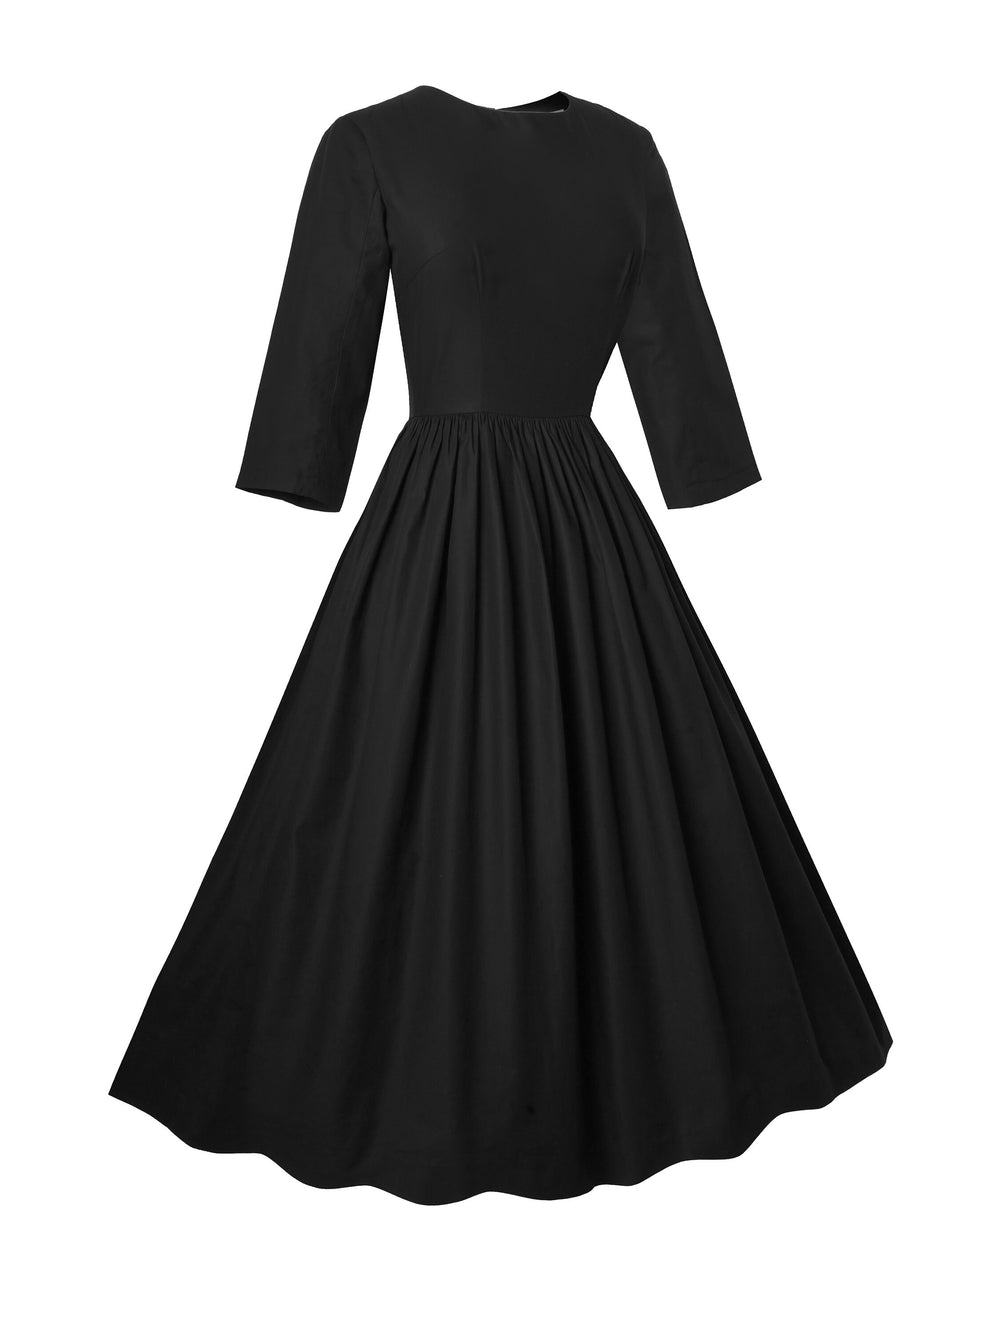 RTS - Size S - Marianne Dress in Raven Black Cotton